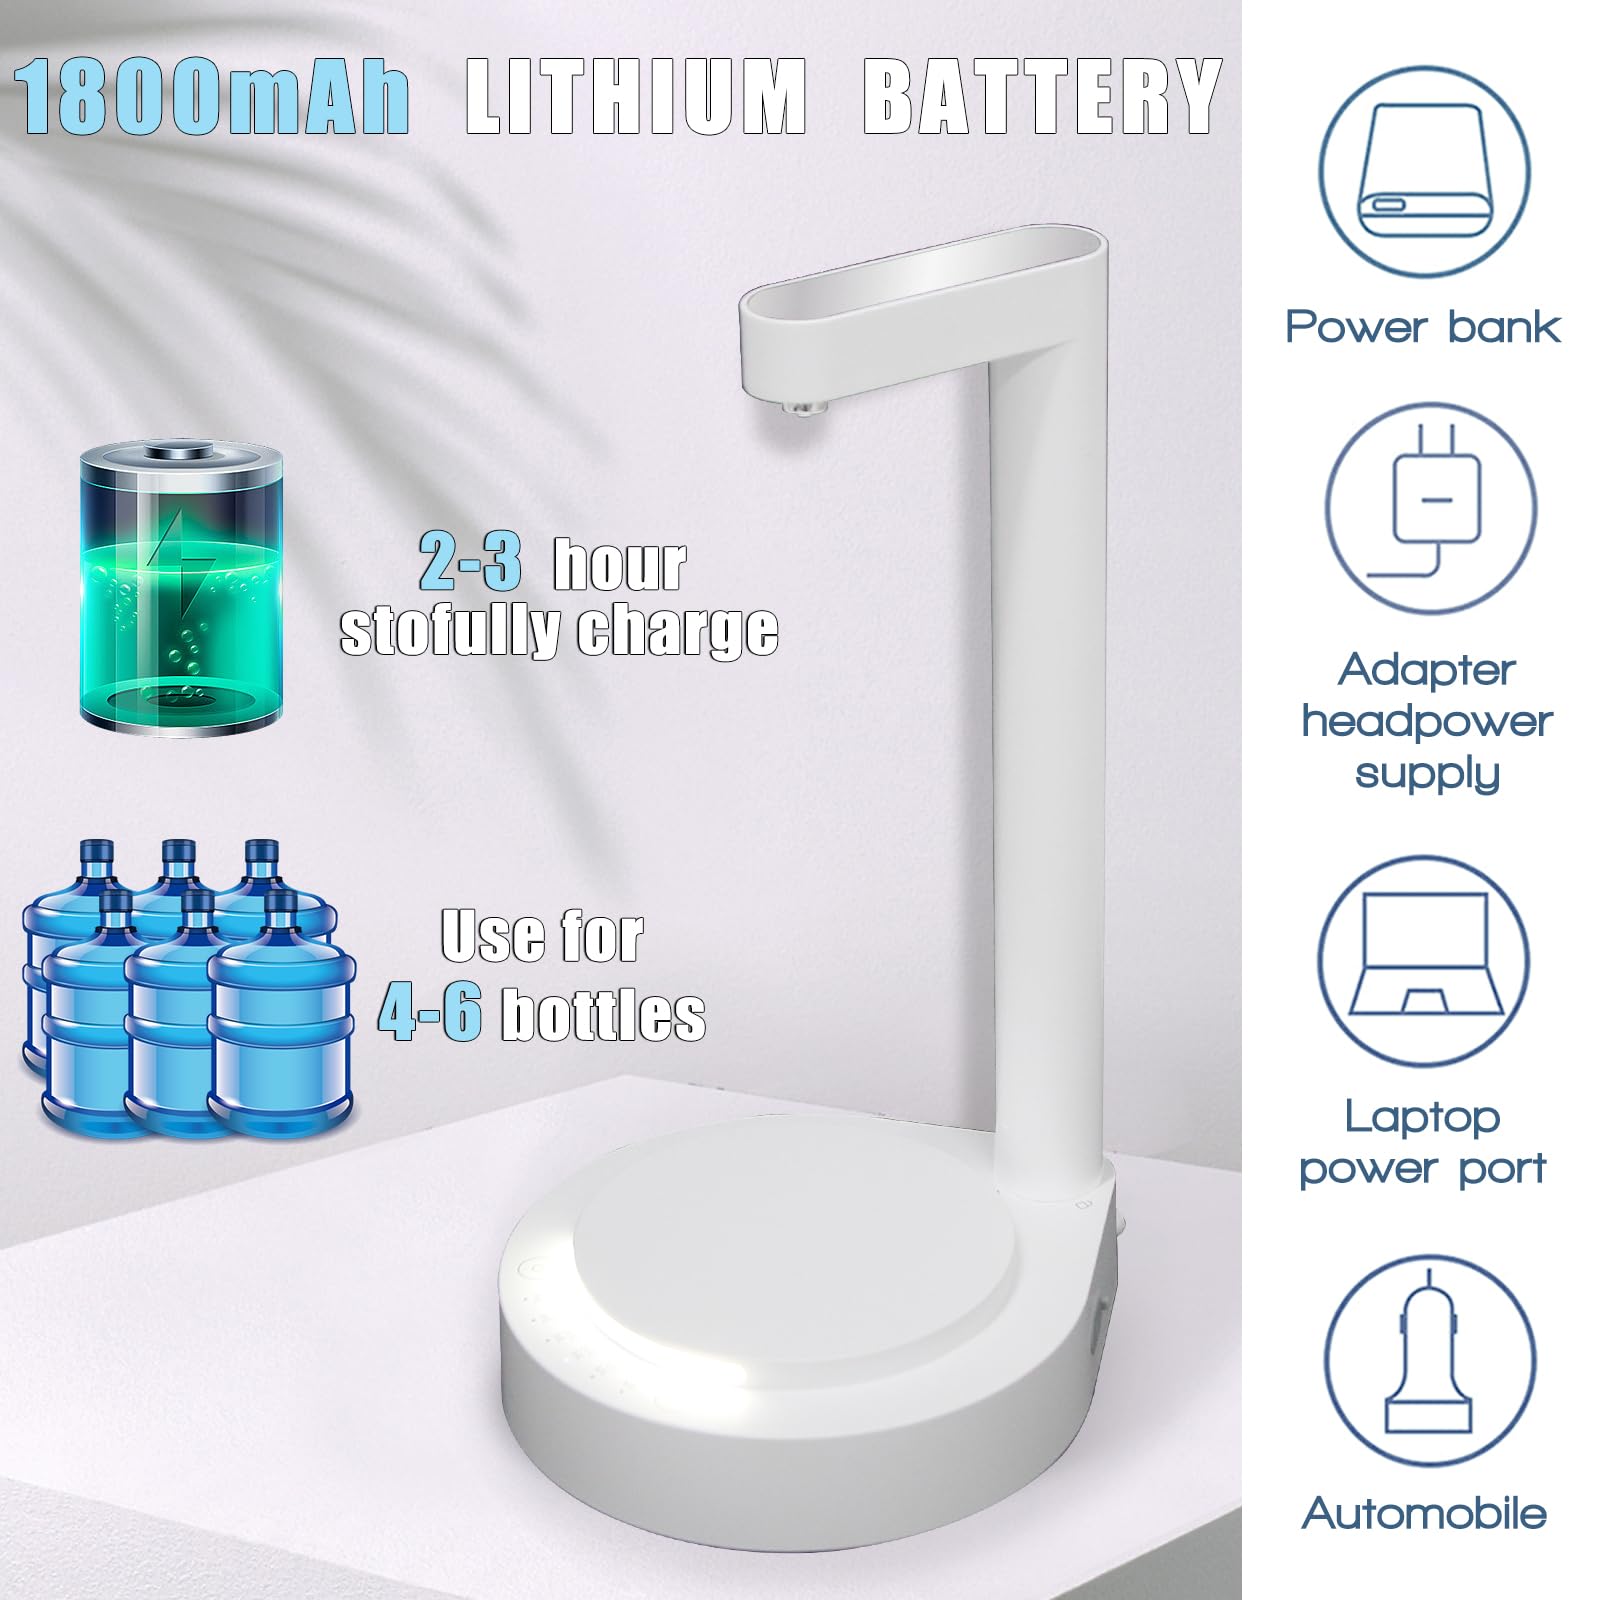 LED Bedside Water Dispenser,Desktop Water Bottle Dispenser,New Upgrade LED Light and Touch Buttons, Portable 5 Gallon Water Dispenser,with 7 Levels Pumping and Light,Suitable for Home, Office,